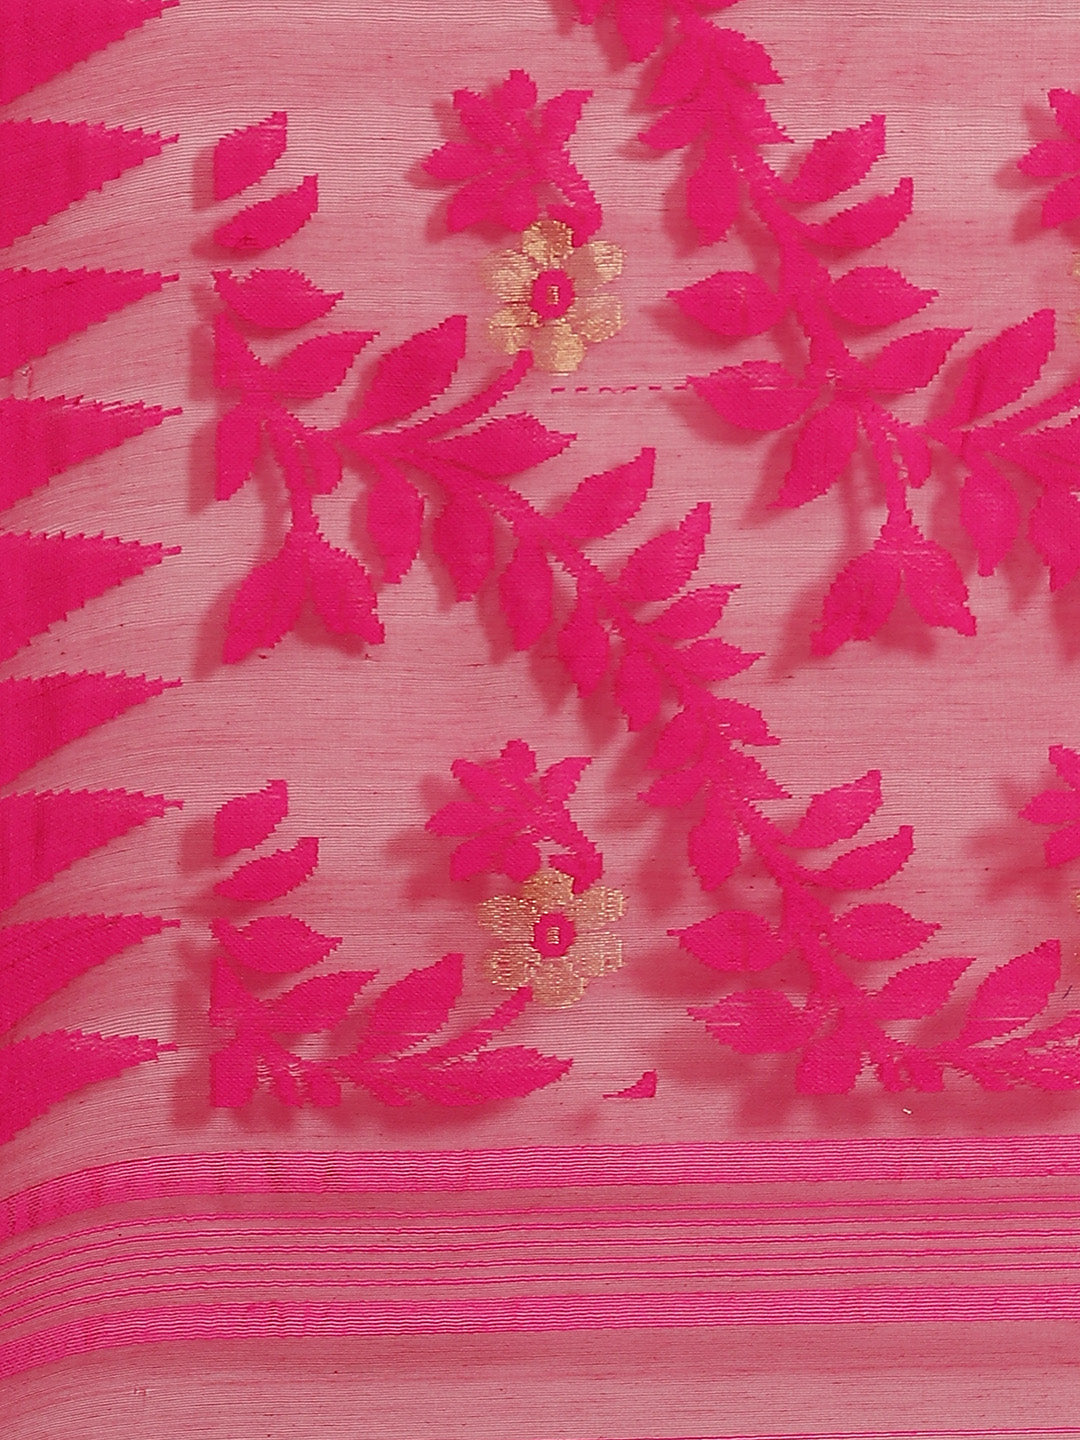 Pink and Gold, Kalakari India Jamdani Silk Cotton Woven Design Saree without blouse CHBHSA0027-Saree-Kalakari India-CHBHSA0027-Bengal, Geographical Indication, Hand Crafted, Hand Painted, Heritage Prints, Jamdani, Natural Dyes, Red, Sarees, Silk Blended, Sustainable Fabrics, Woven, Yellow-[Linen,Ethnic,wear,Fashionista,Handloom,Handicraft,Indigo,blockprint,block,print,Cotton,Chanderi,Blue, latest,classy,party,bollywood,trendy,summer,style,traditional,formal,elegant,unique,style,hand,block,print,